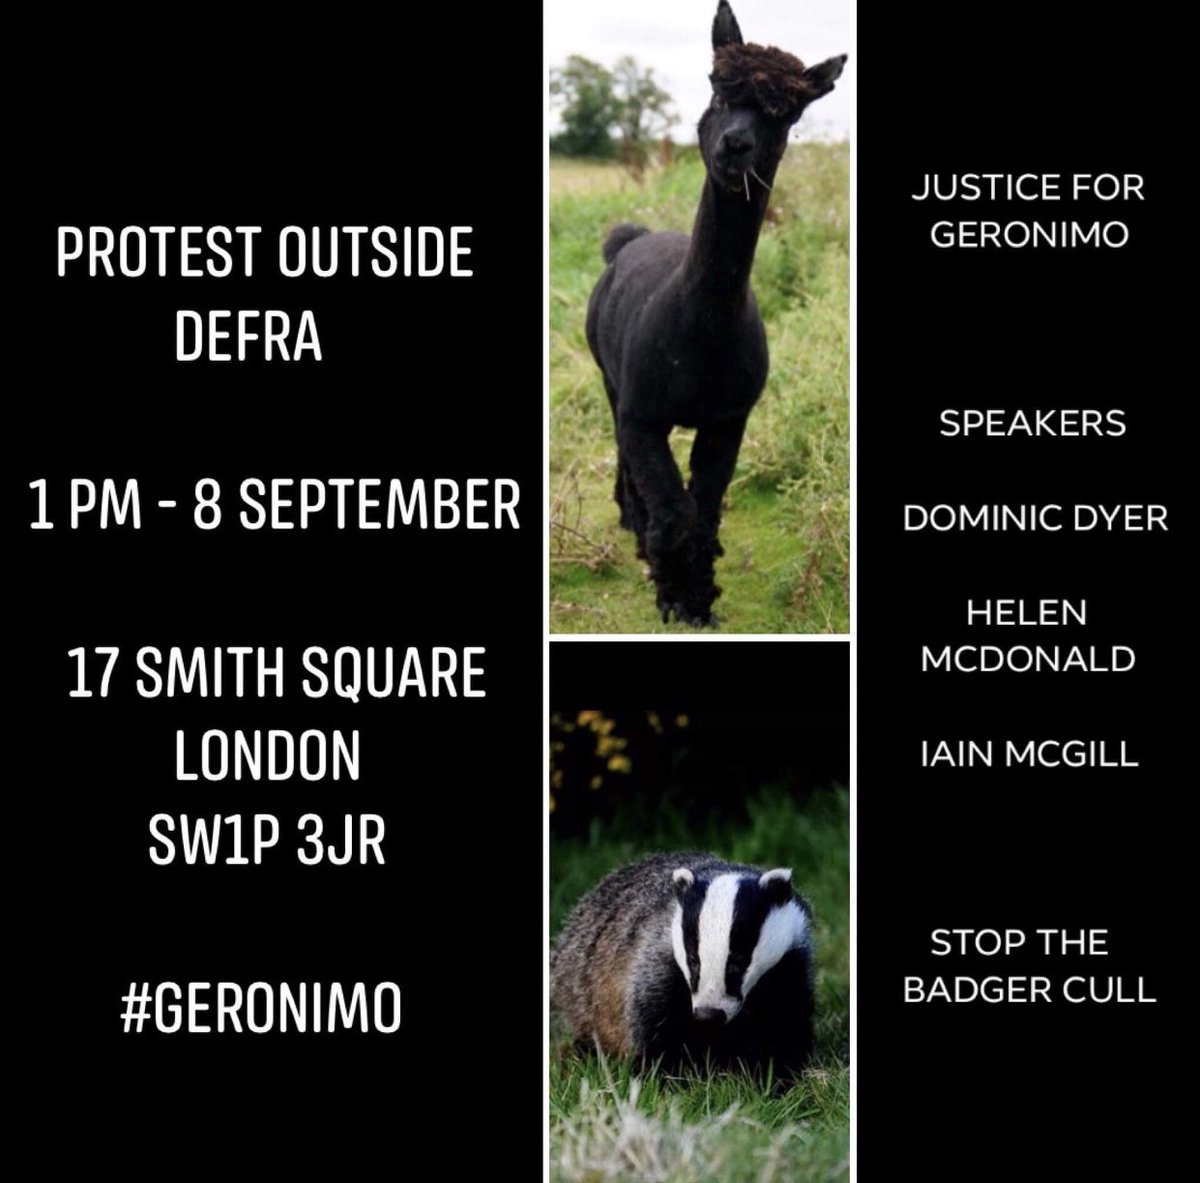 For #Geronimothealpaca 

Also 🛑 this unscientific badger cull 
Protest outside DEFRA 
1pm 8th September.